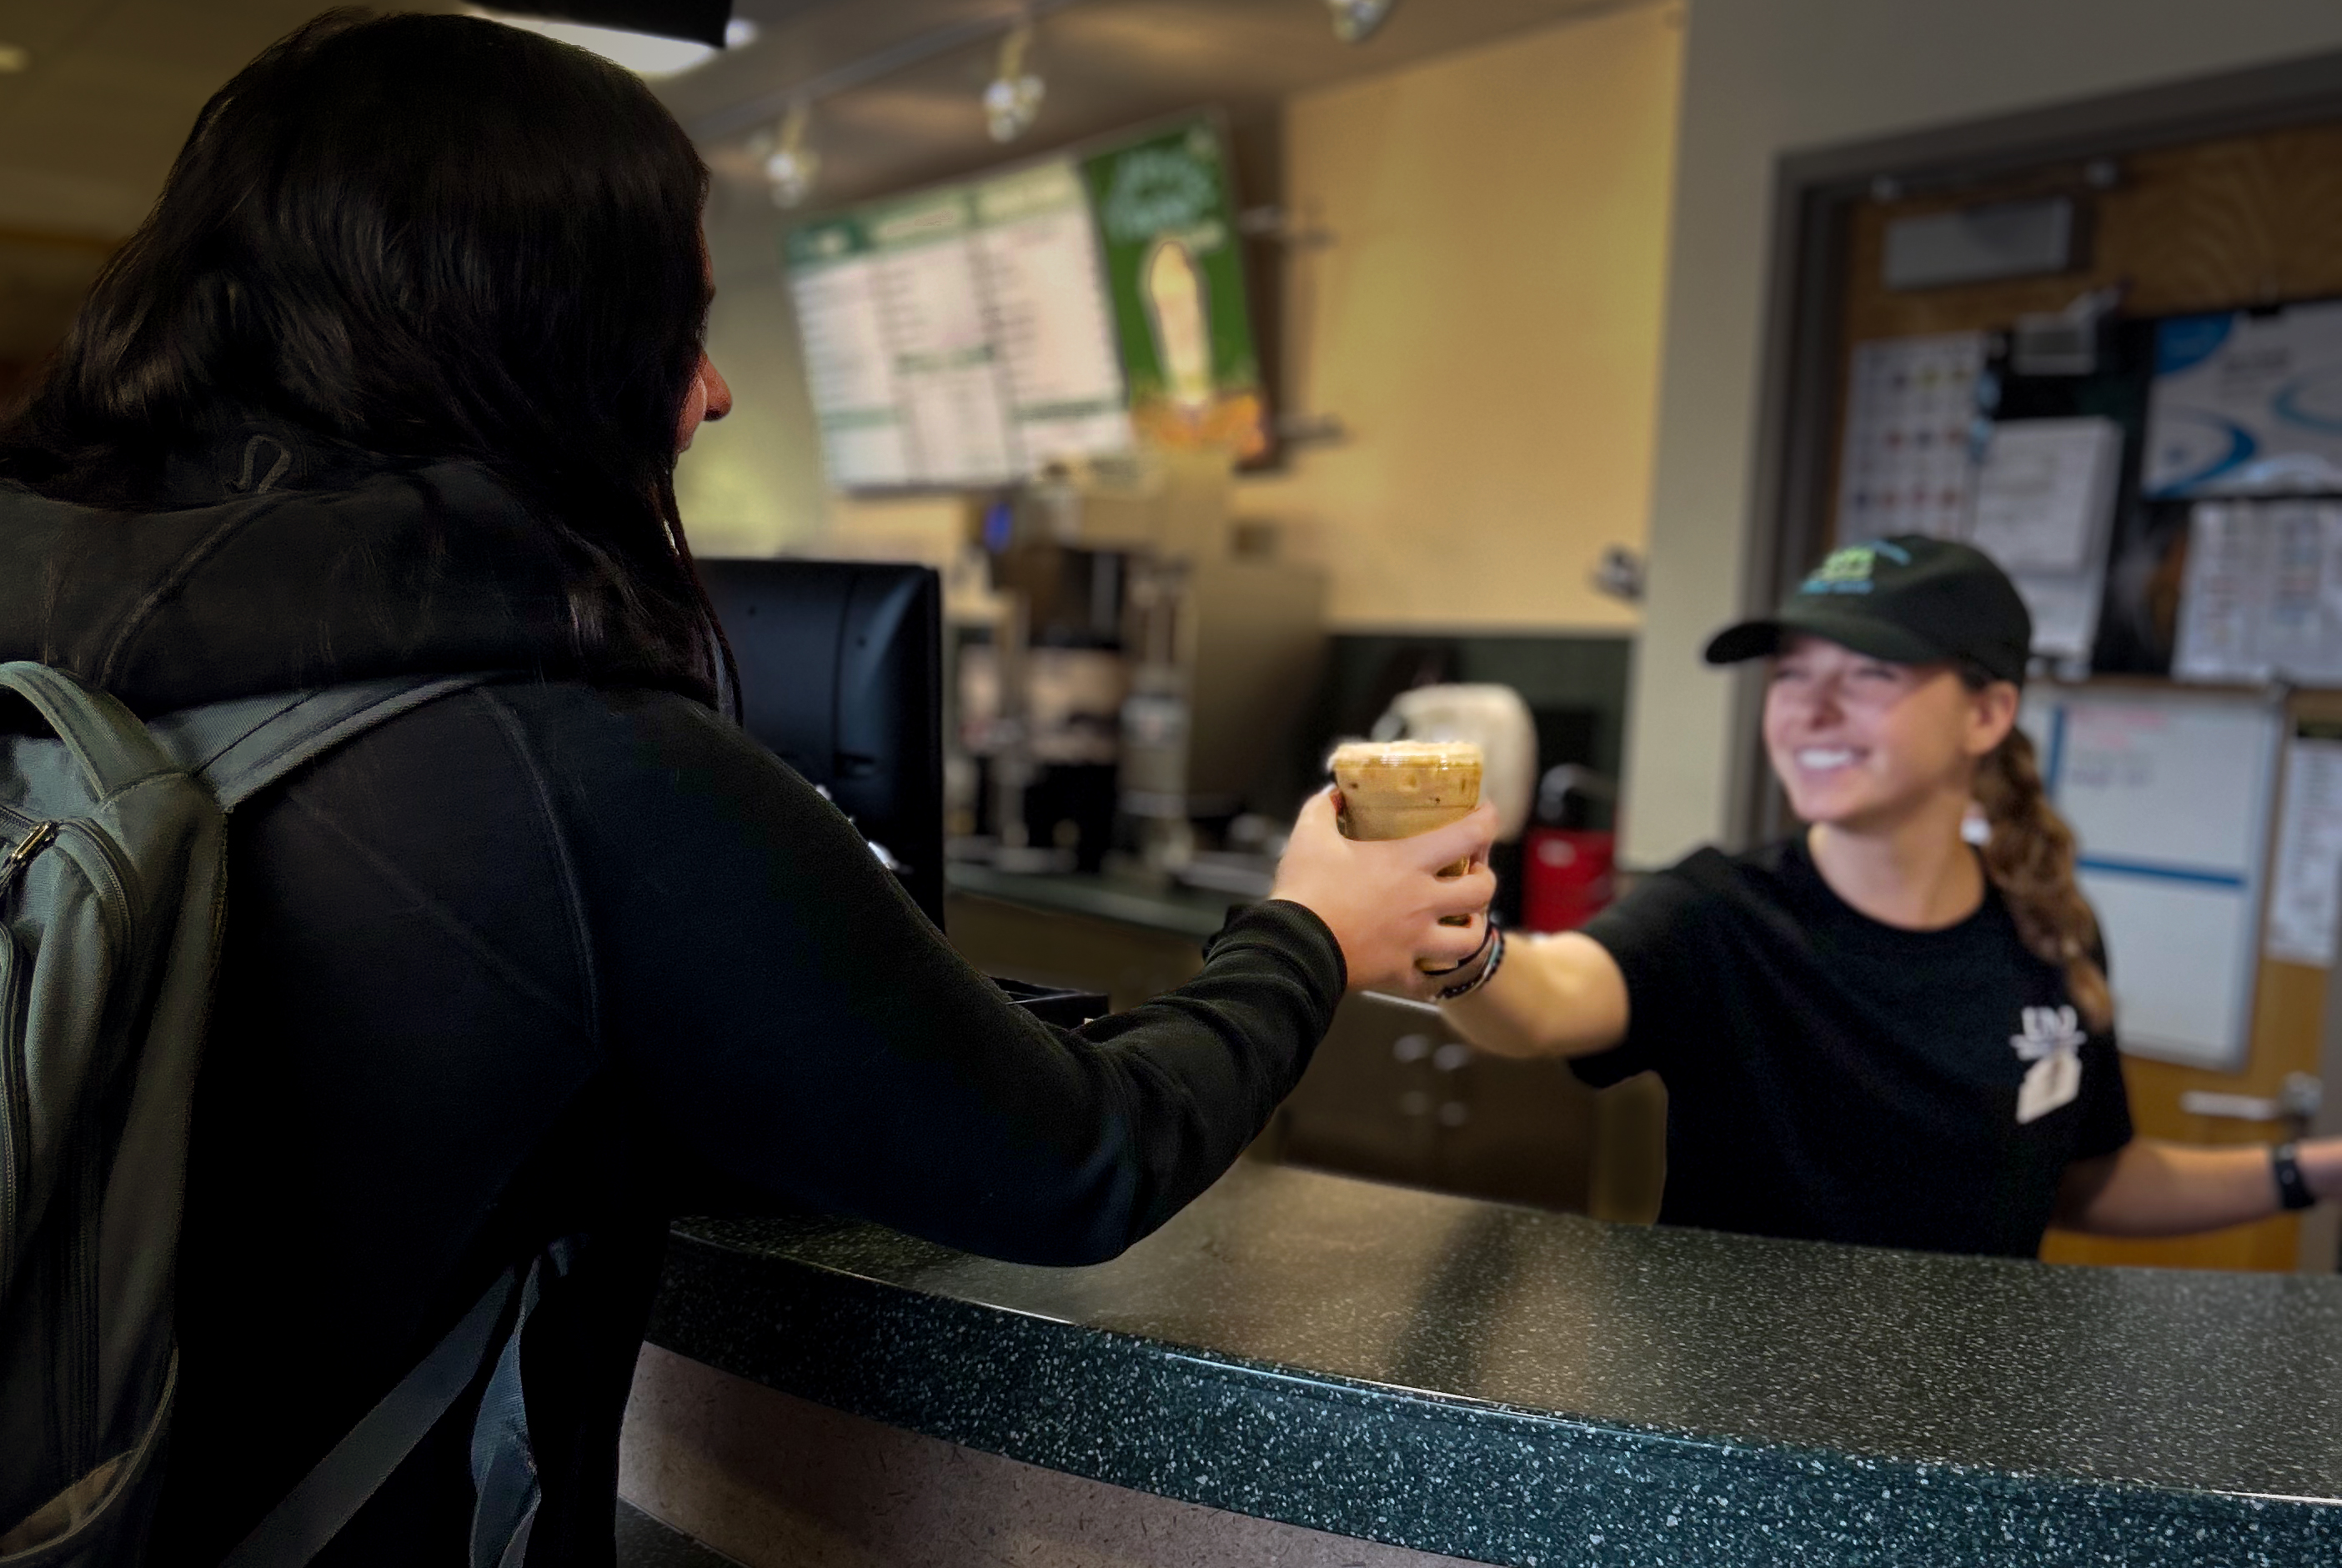 Northern Shores Coffee Shop employee hands a guest their coffee order with a smile